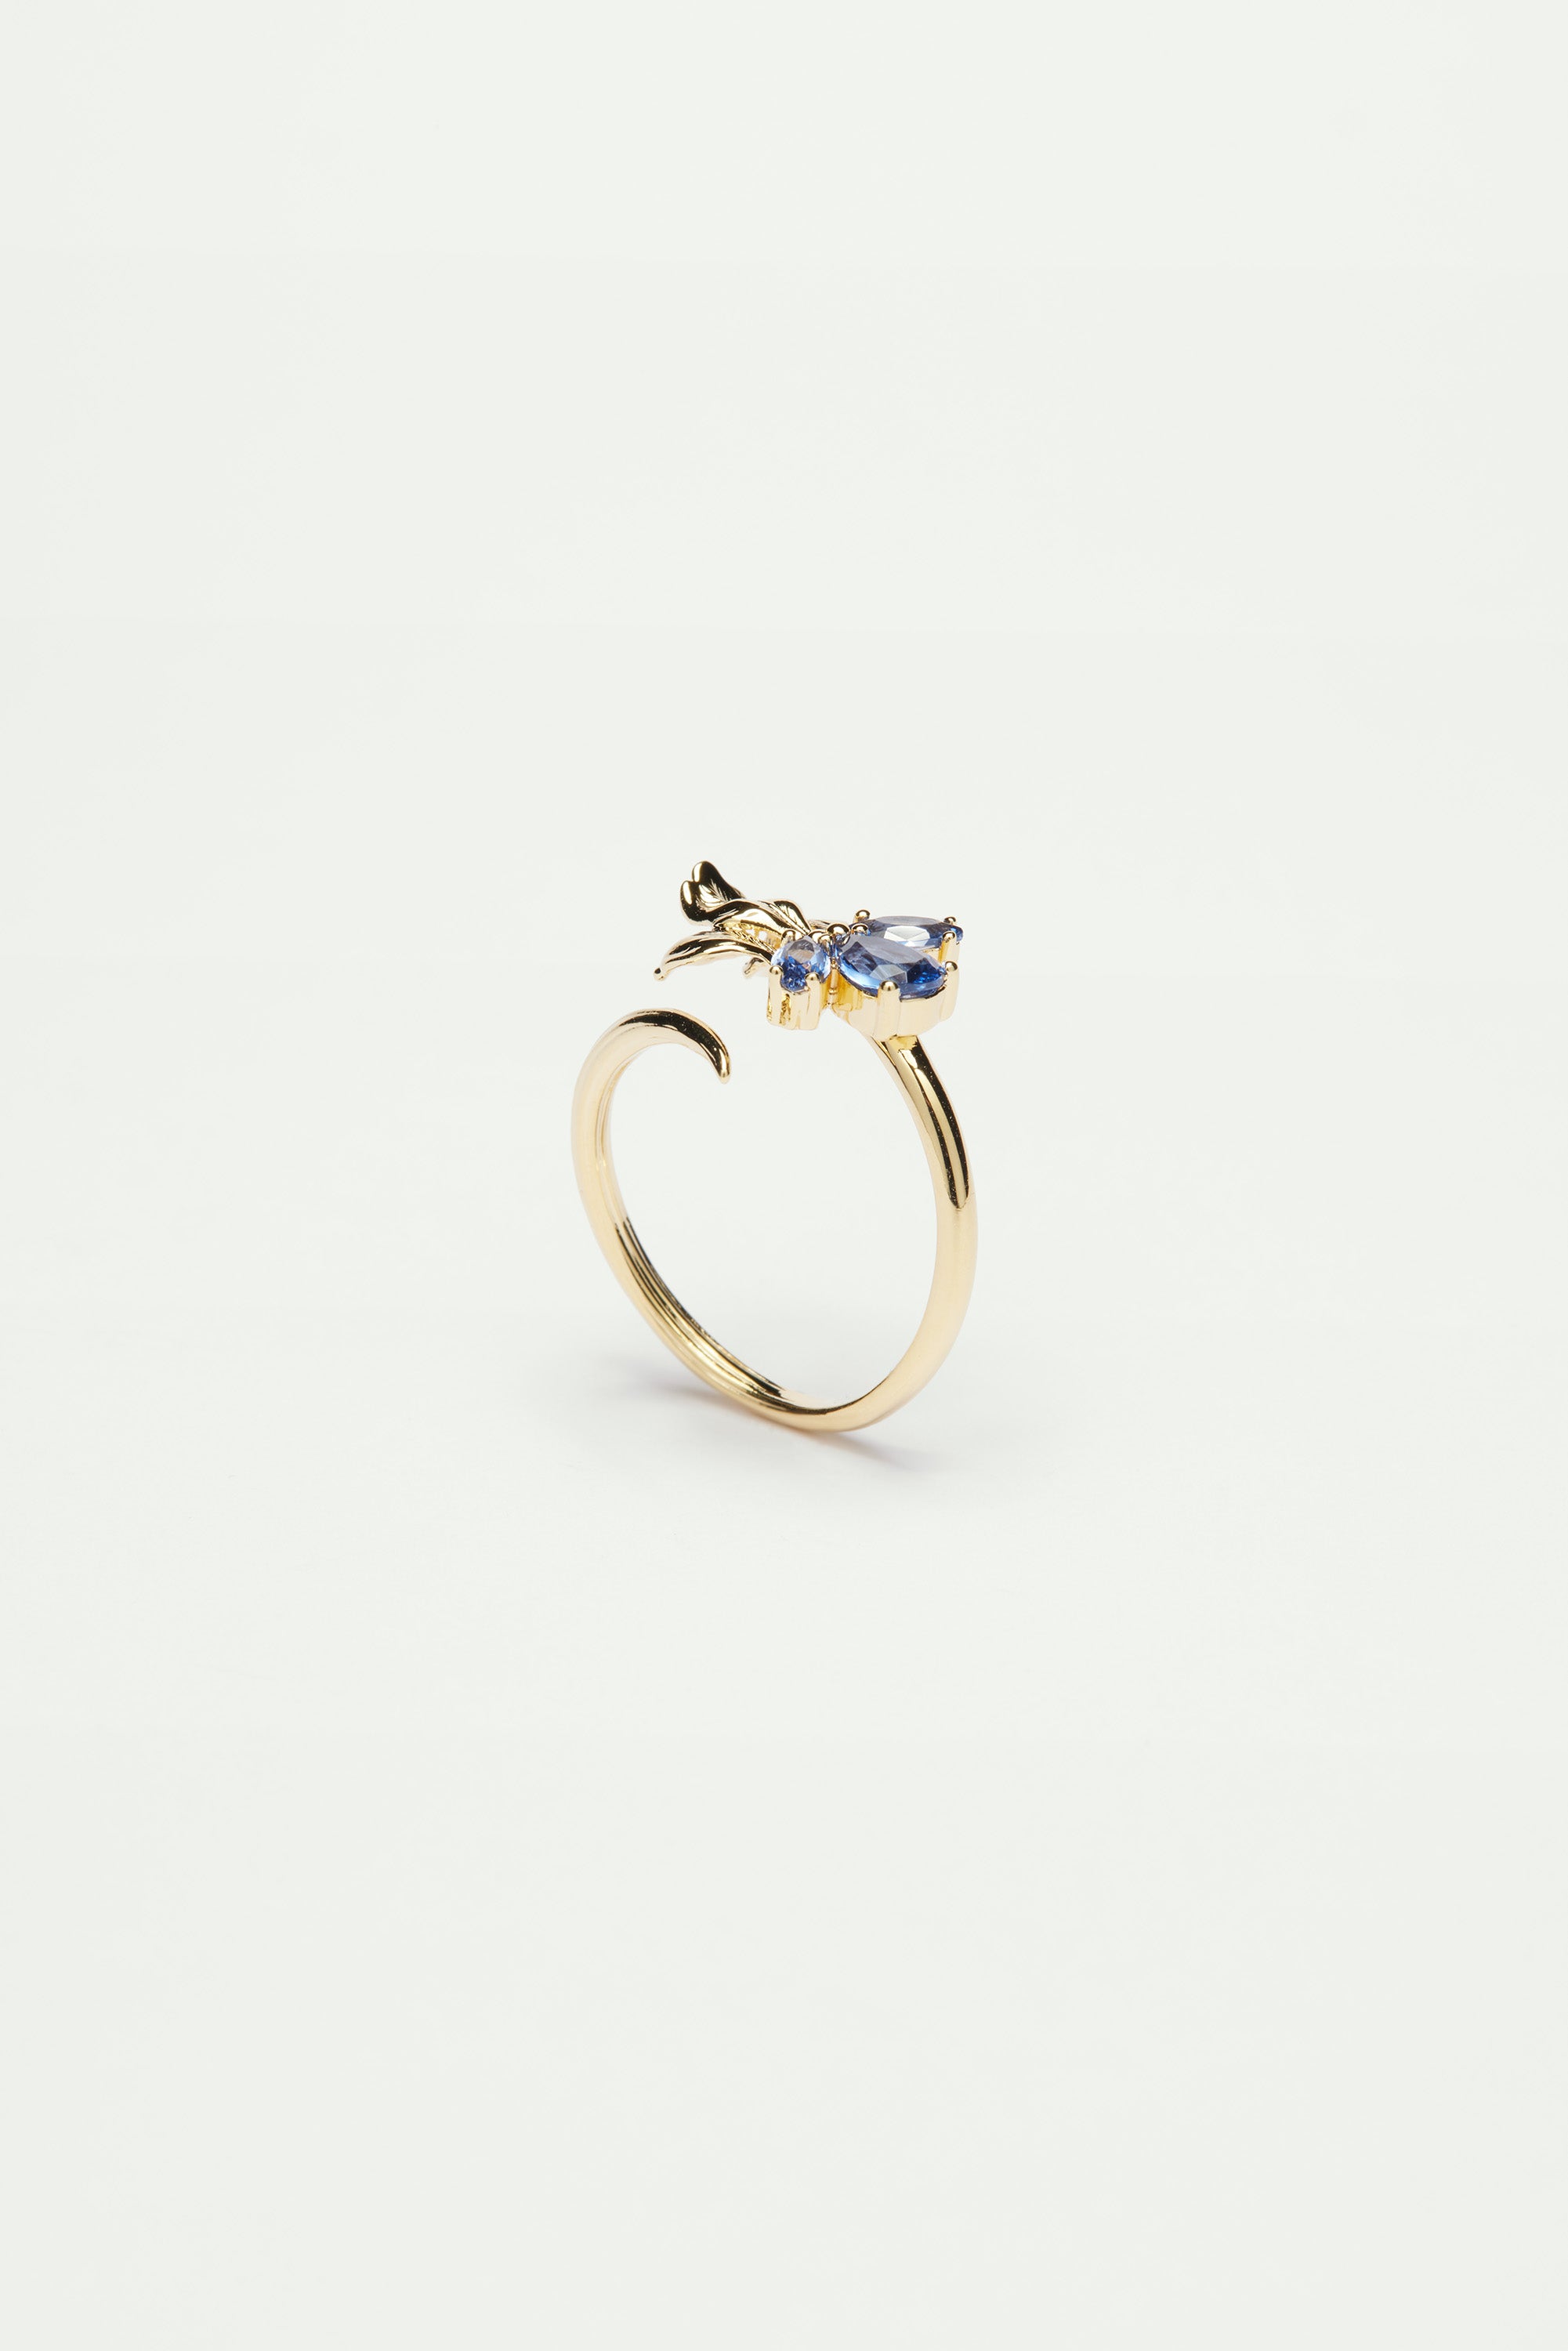 Gold iris and blue cristal adjustable ring